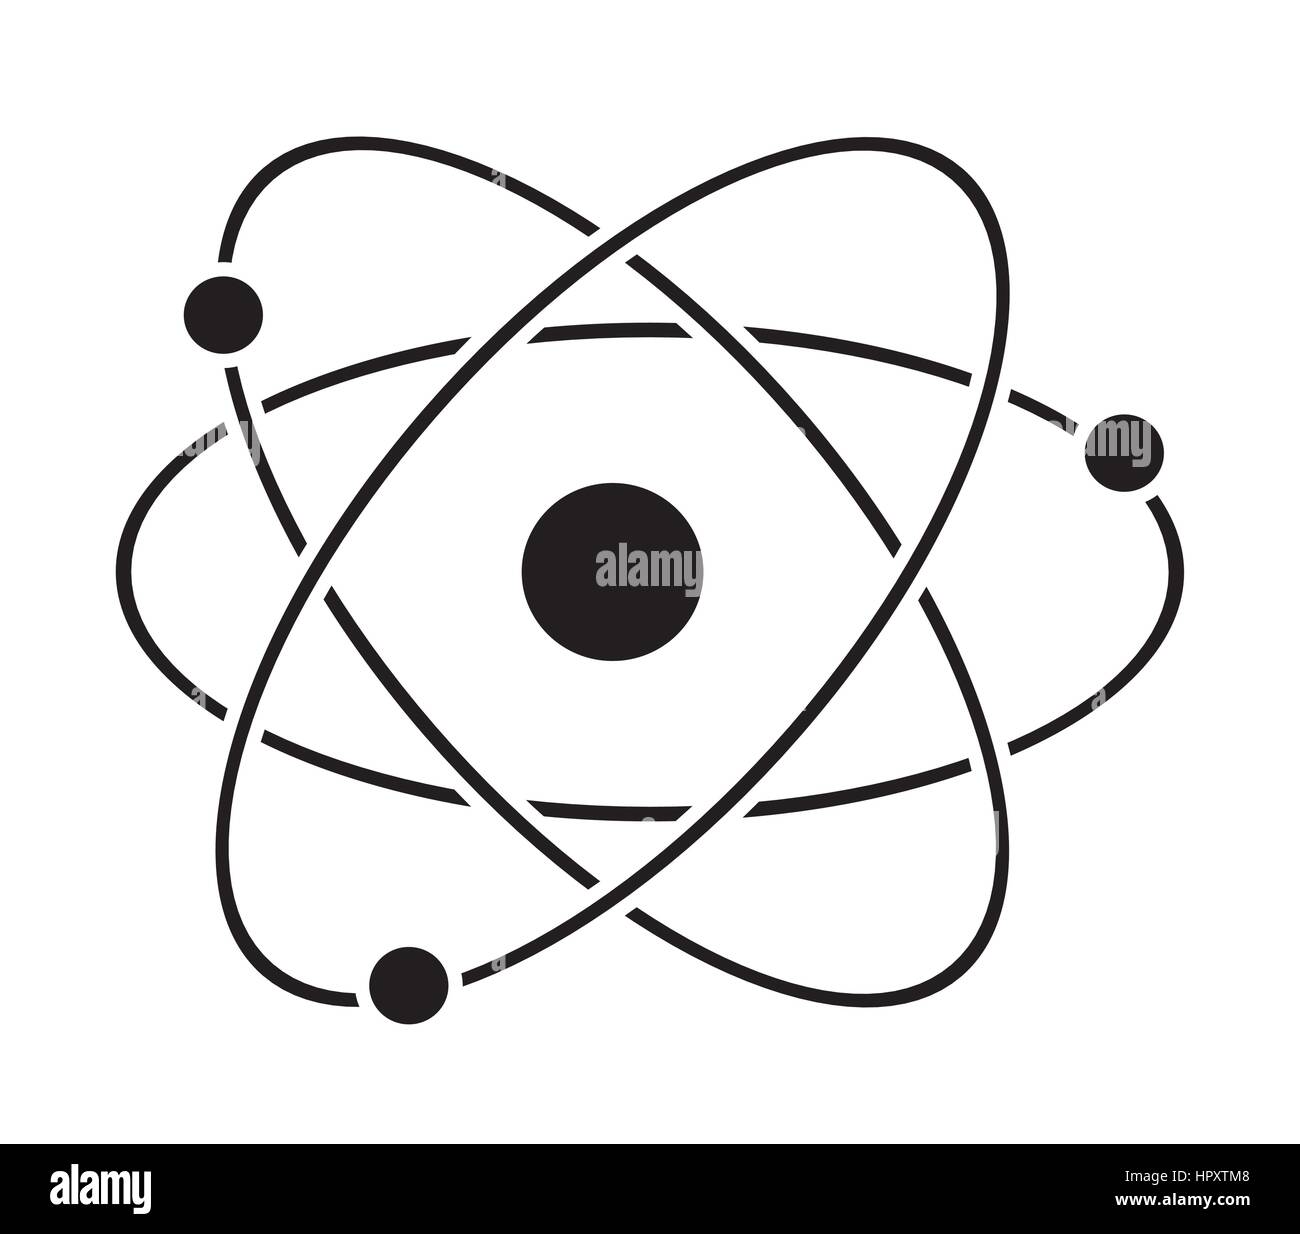 Atom icon vector isolated in white background. Stock Vector